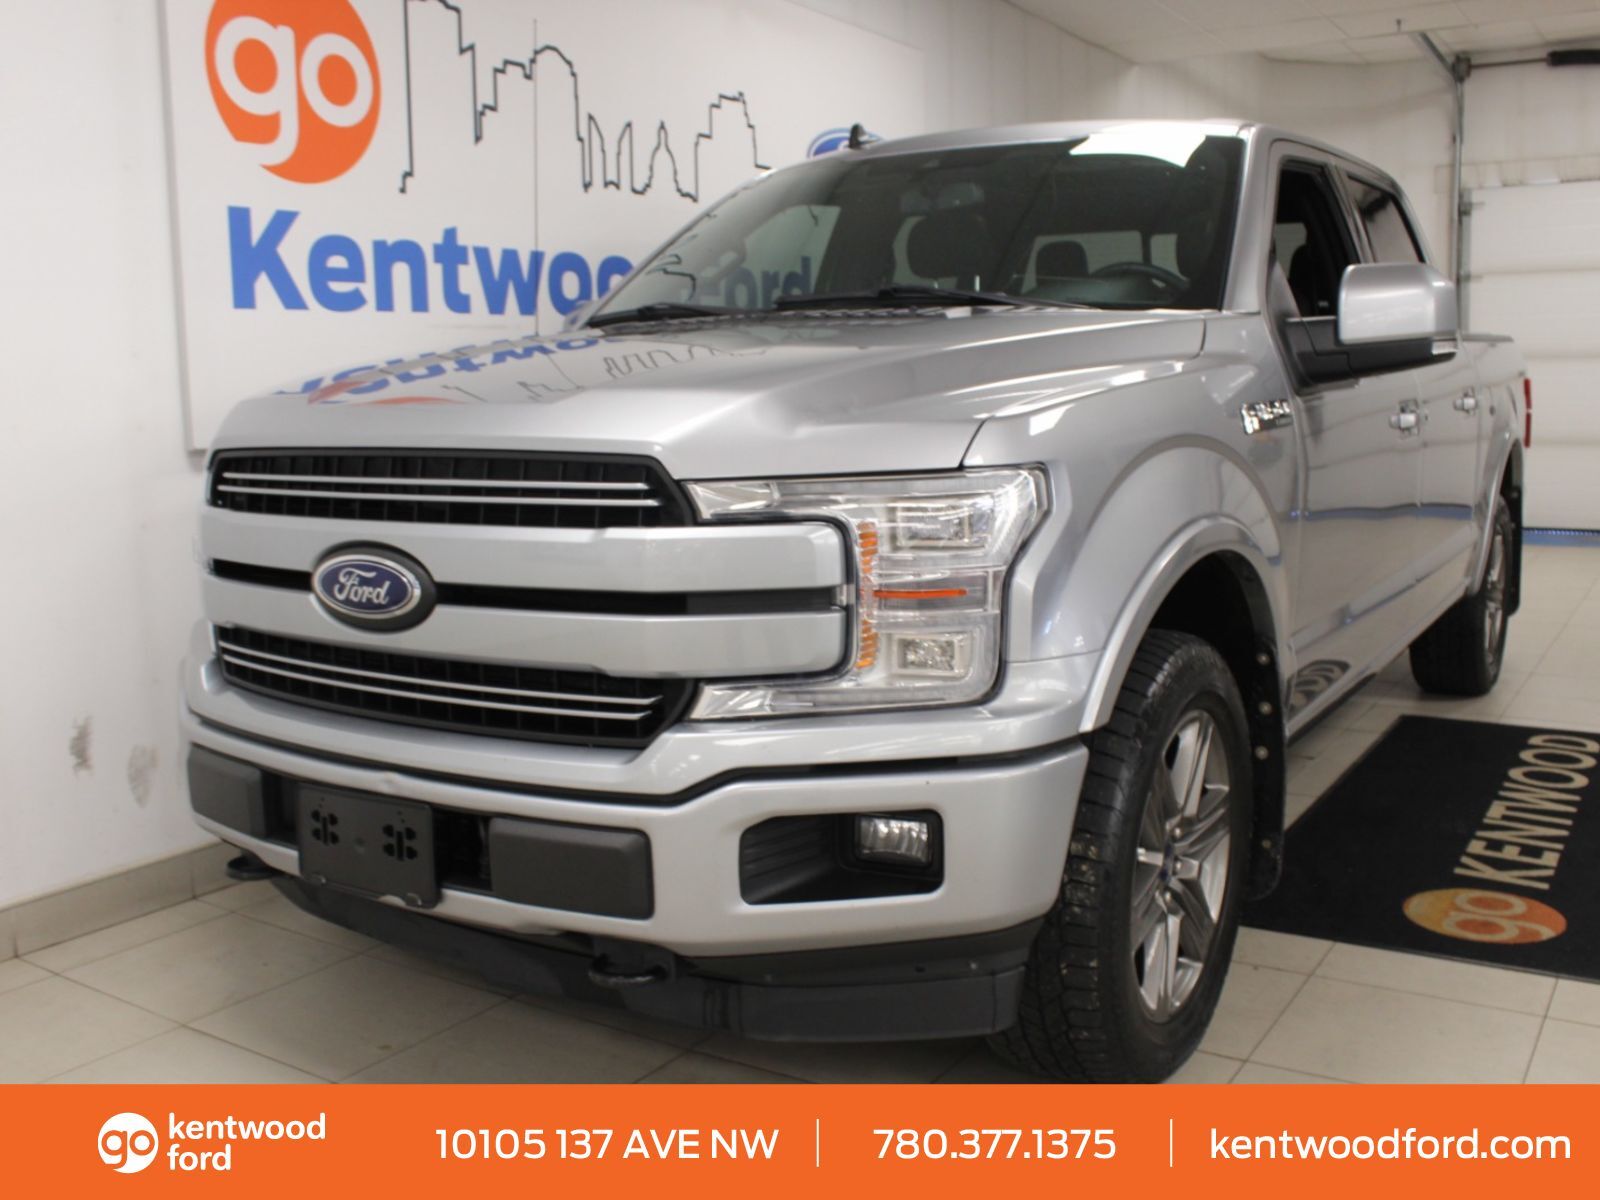 2020 Ford F-150 Lariat | 502a | 4x4 | Sport | 20s | tailgate Step 